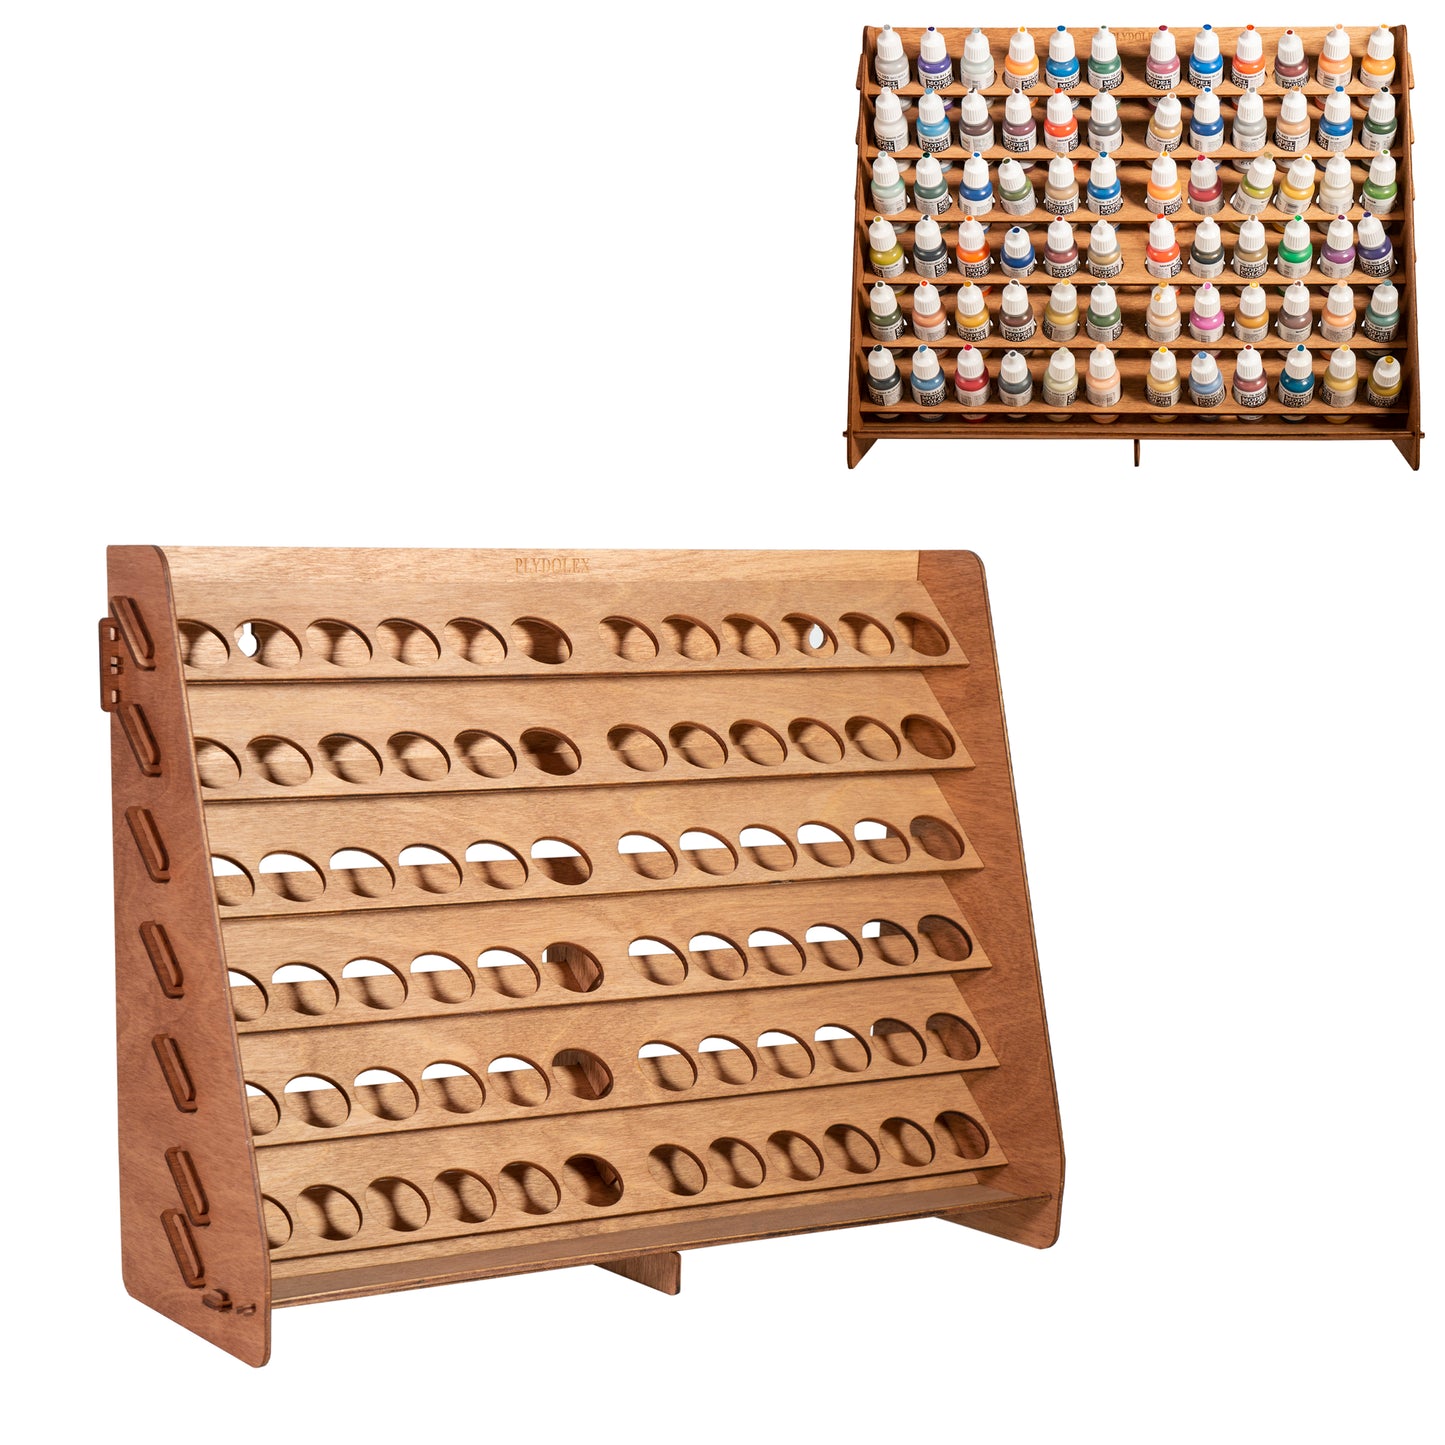 PLYDOLEX Vallejo Paint Rack Organizer with 72 Holes for Miniature